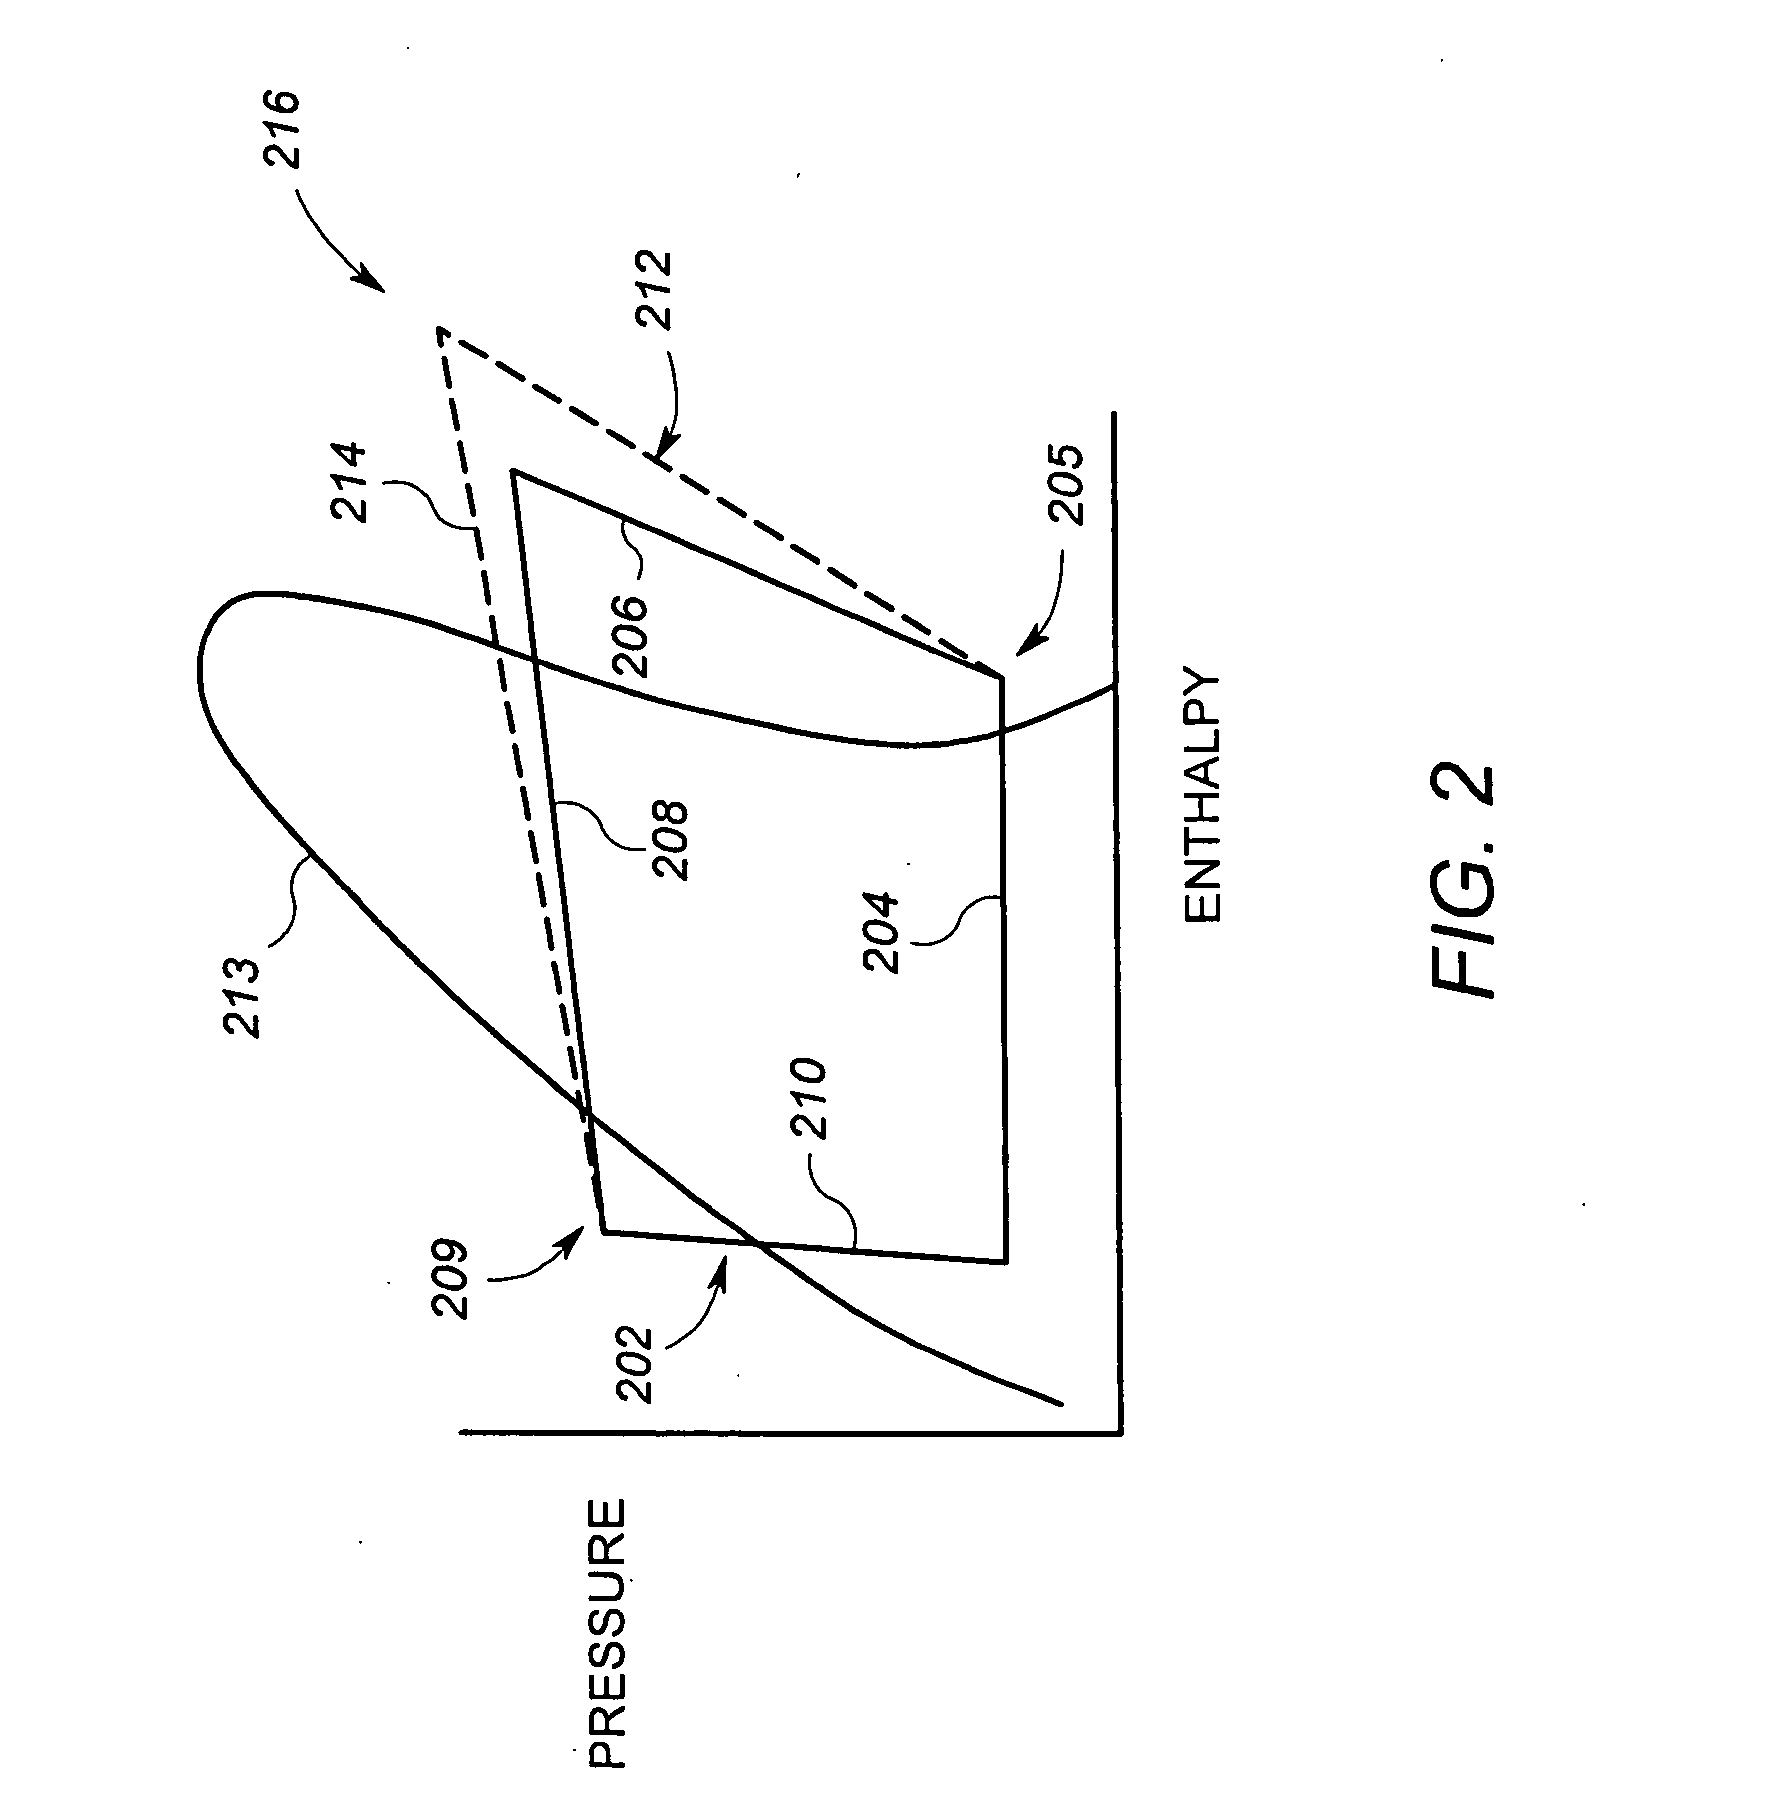 Refrigeration system energy efficiency enhancement using microsystems